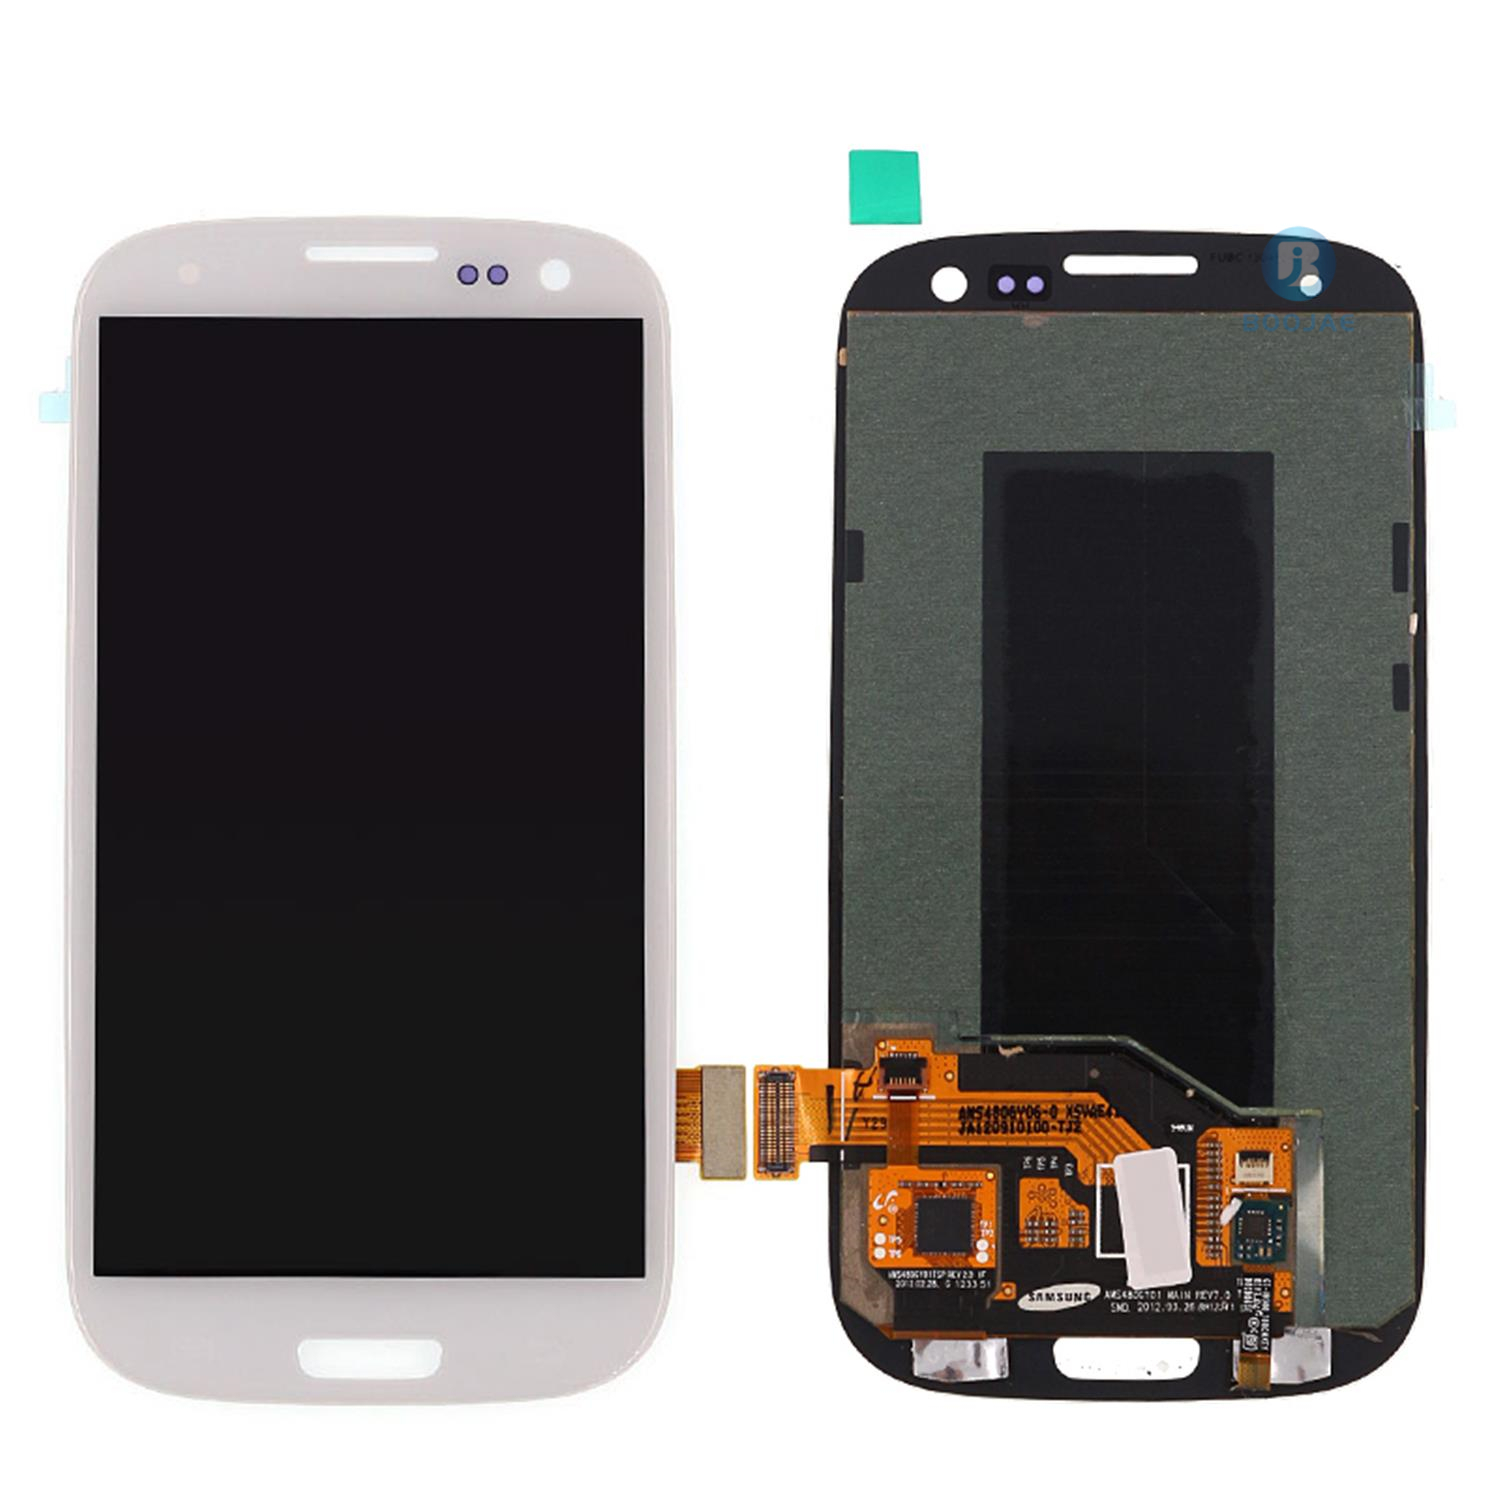 Samsung Galaxy S3 i9300 LCD Screen Display and Touch Panel Digitizer Assembly Replacement